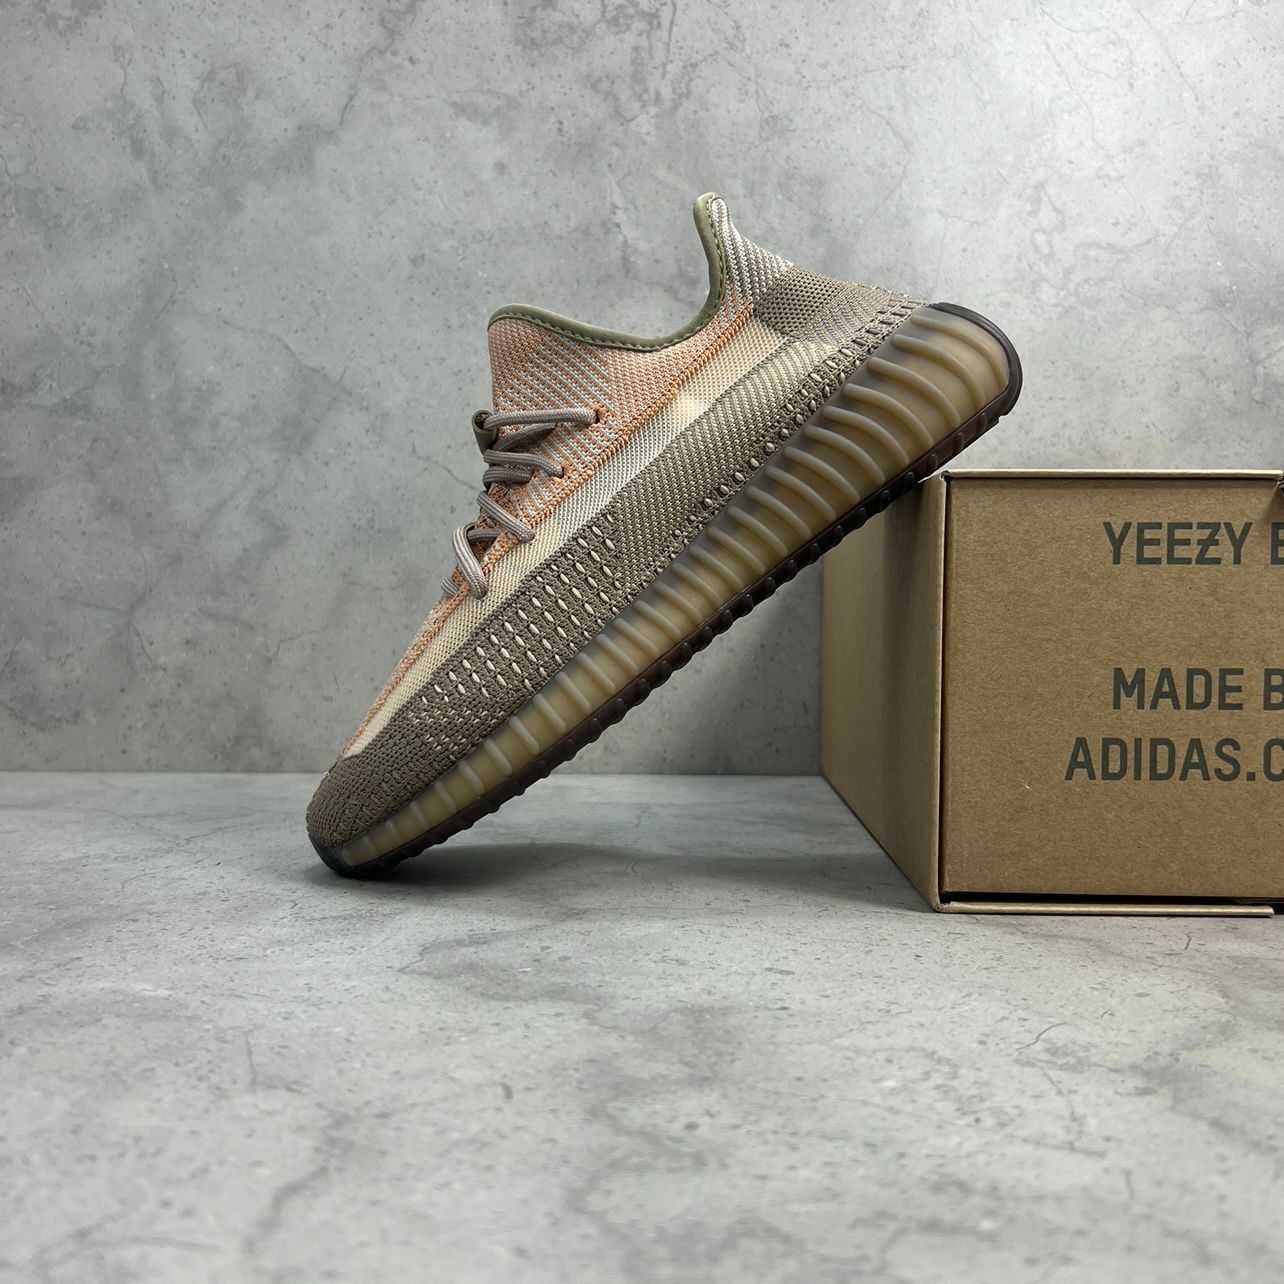 Adidas Yeezy Boost 350 V2 Sand Taupe - 40,41,42,43,44,45,46